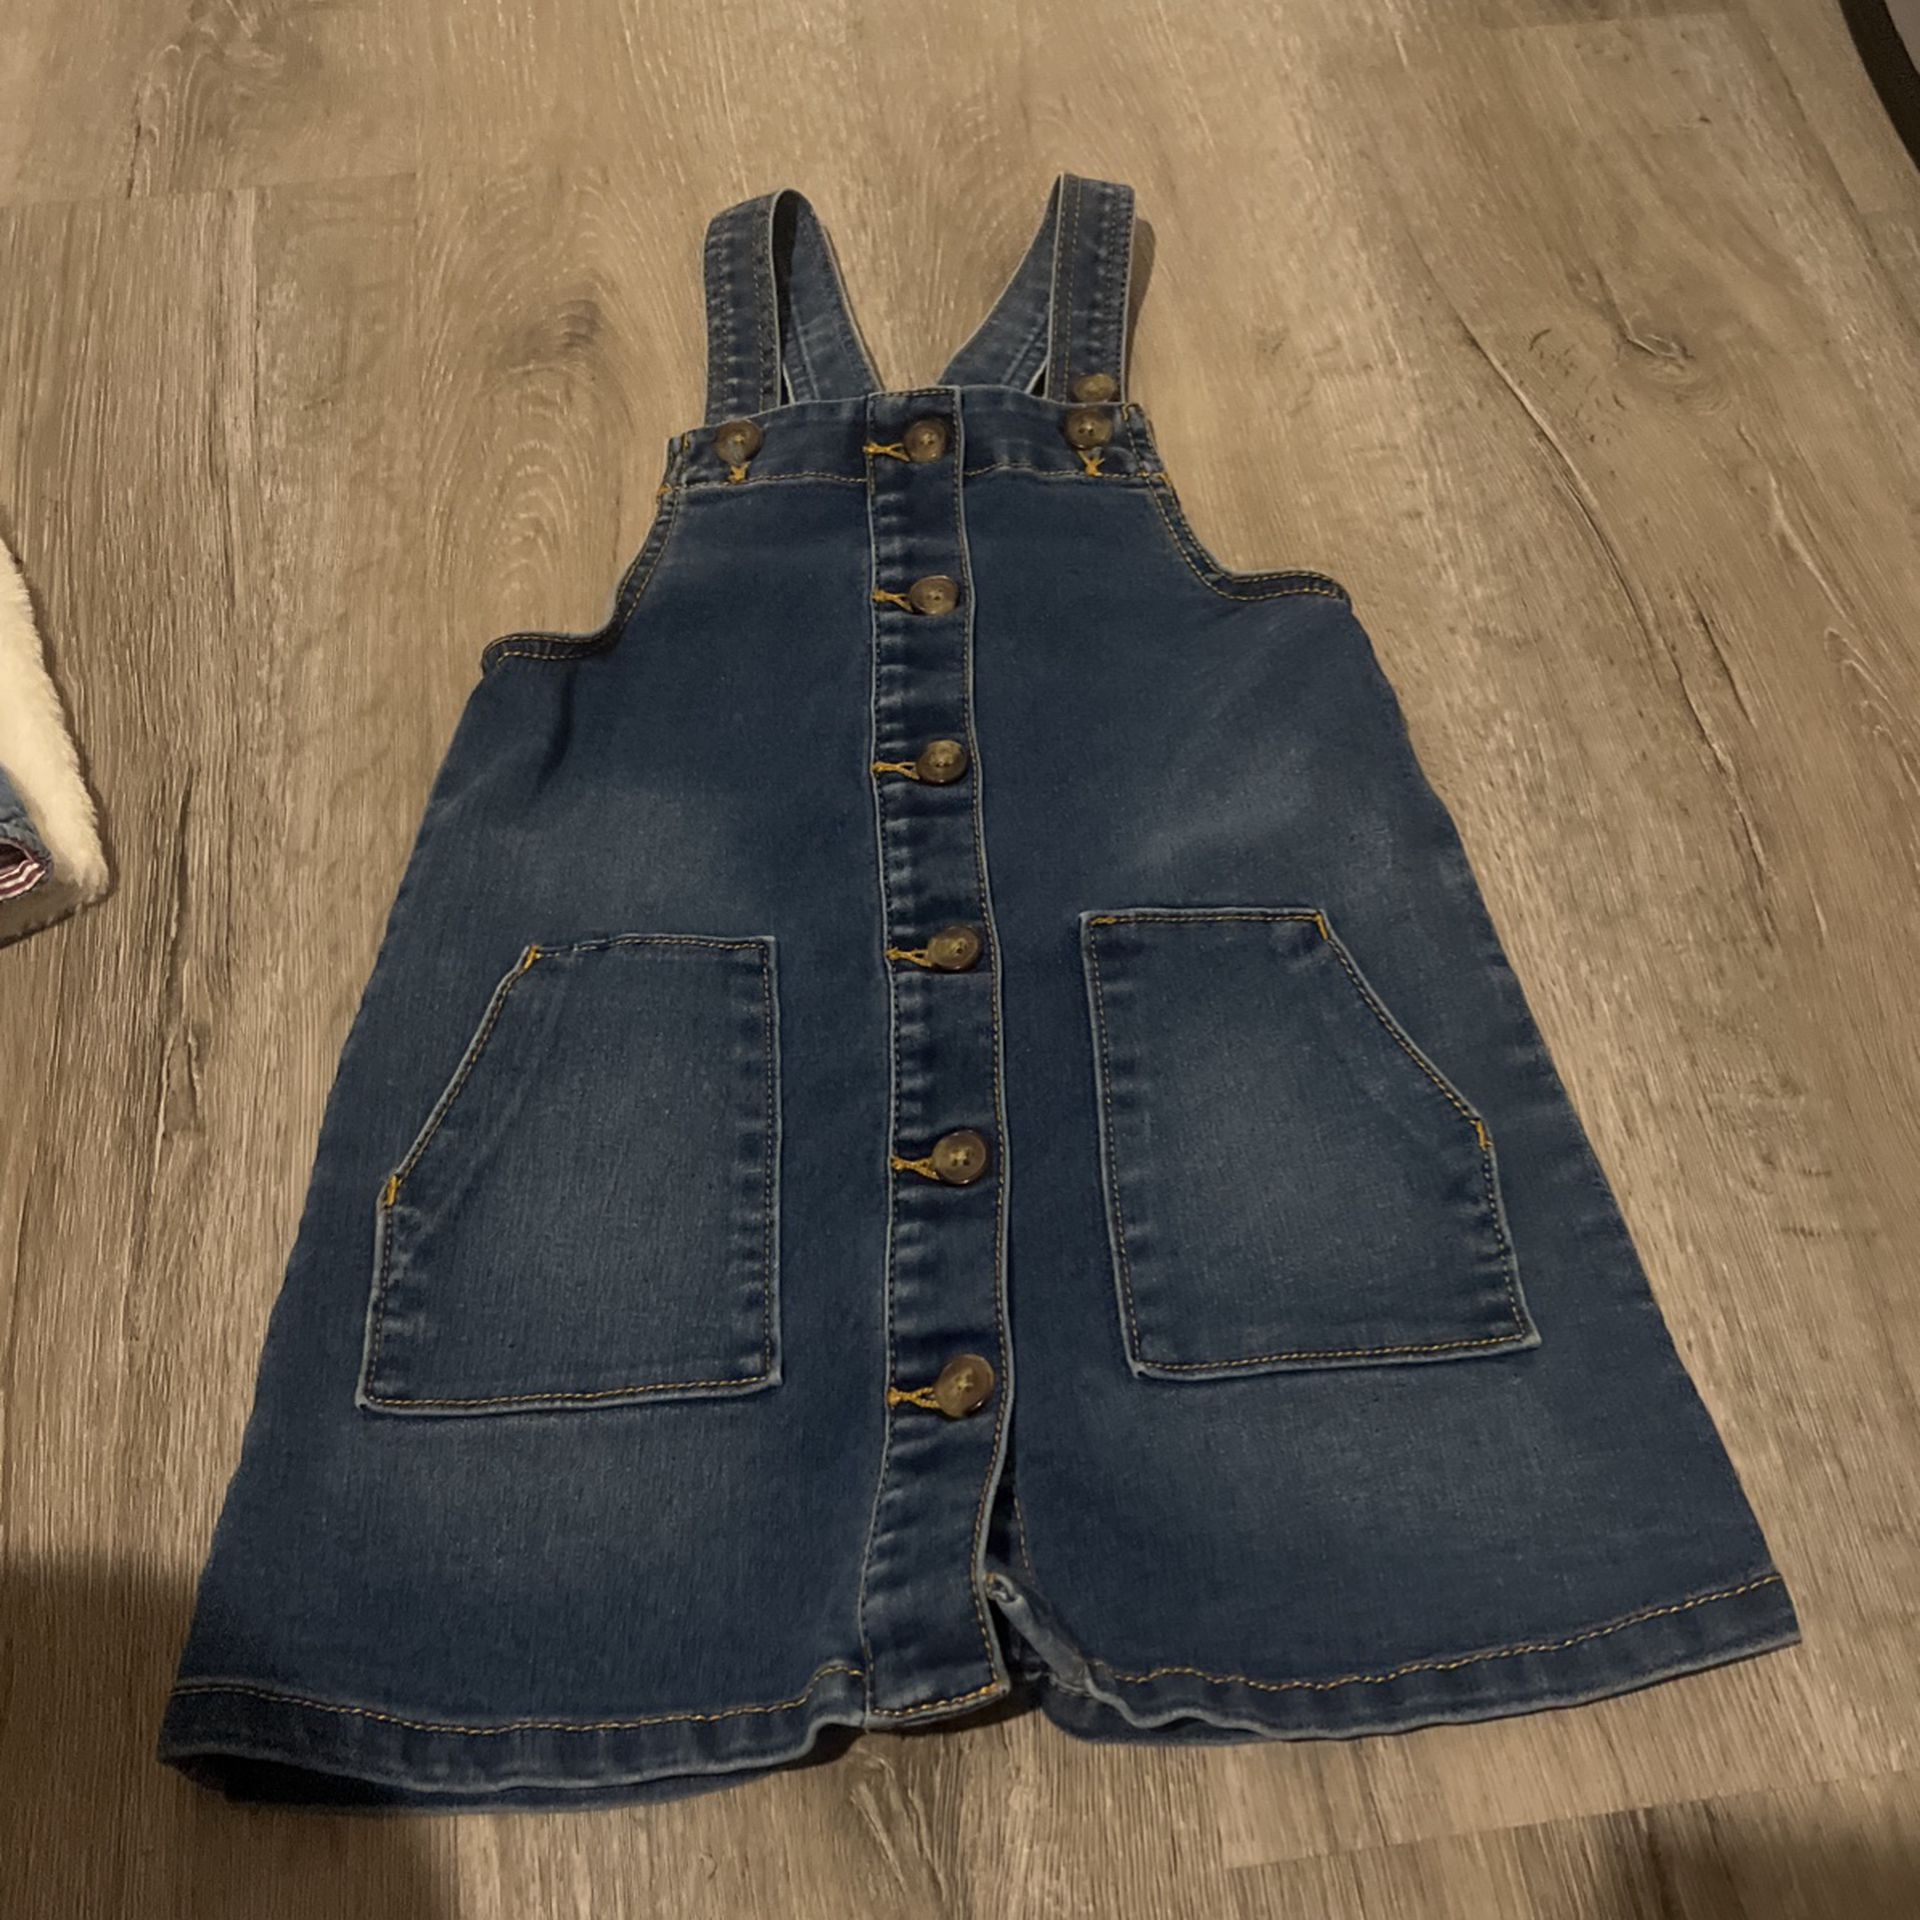 Girls Overall Dress Size 5t